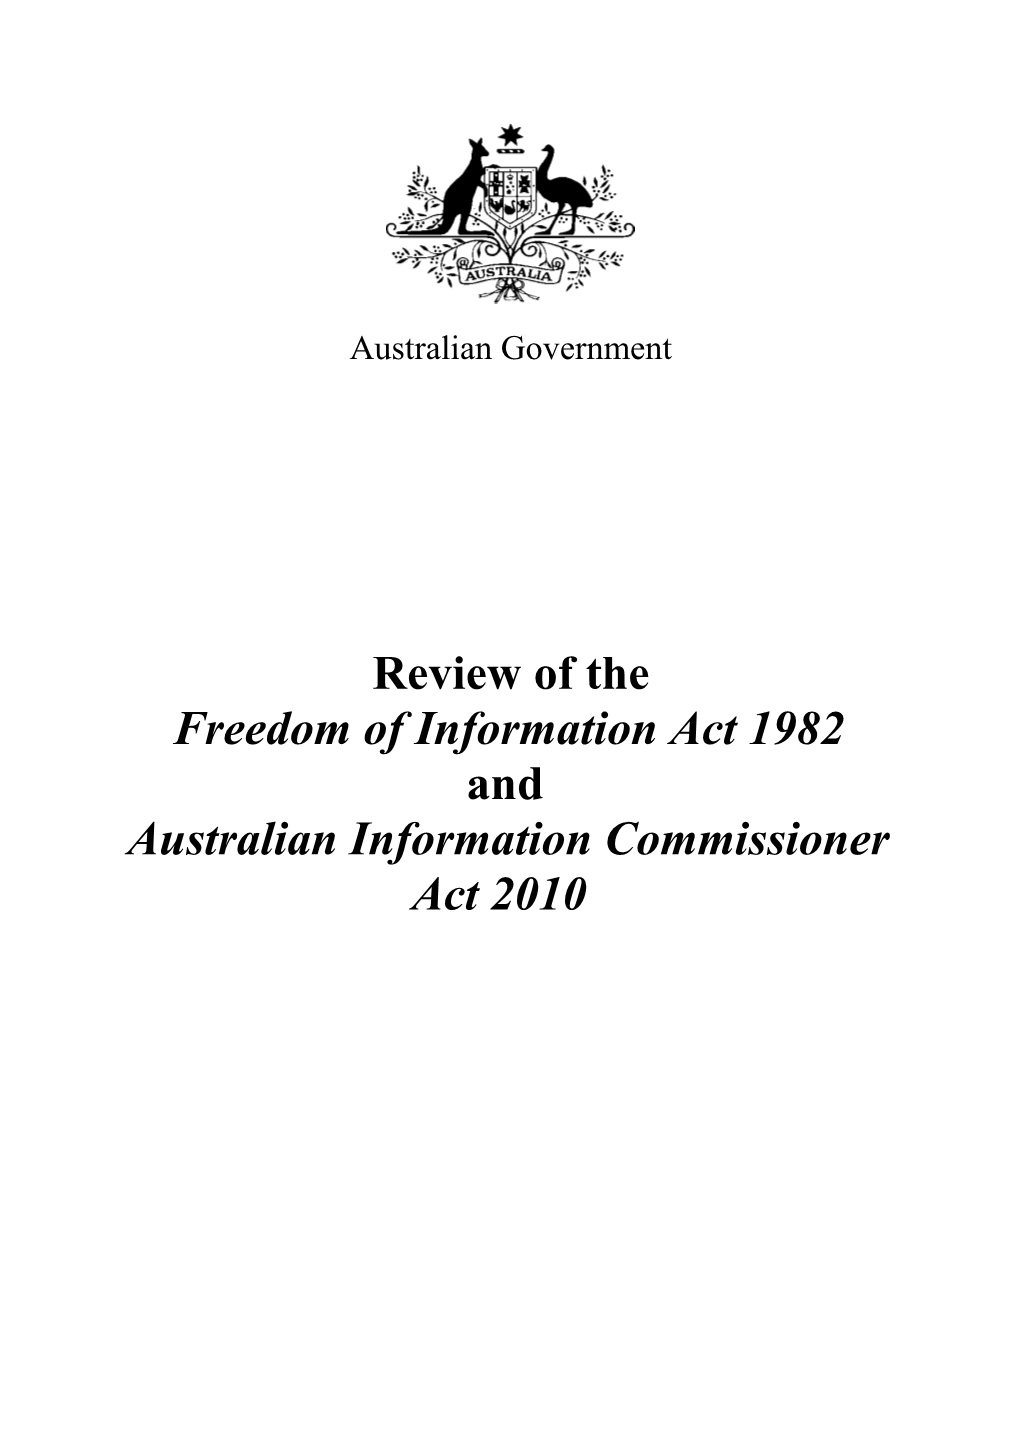 Freedom of Information Act 1982